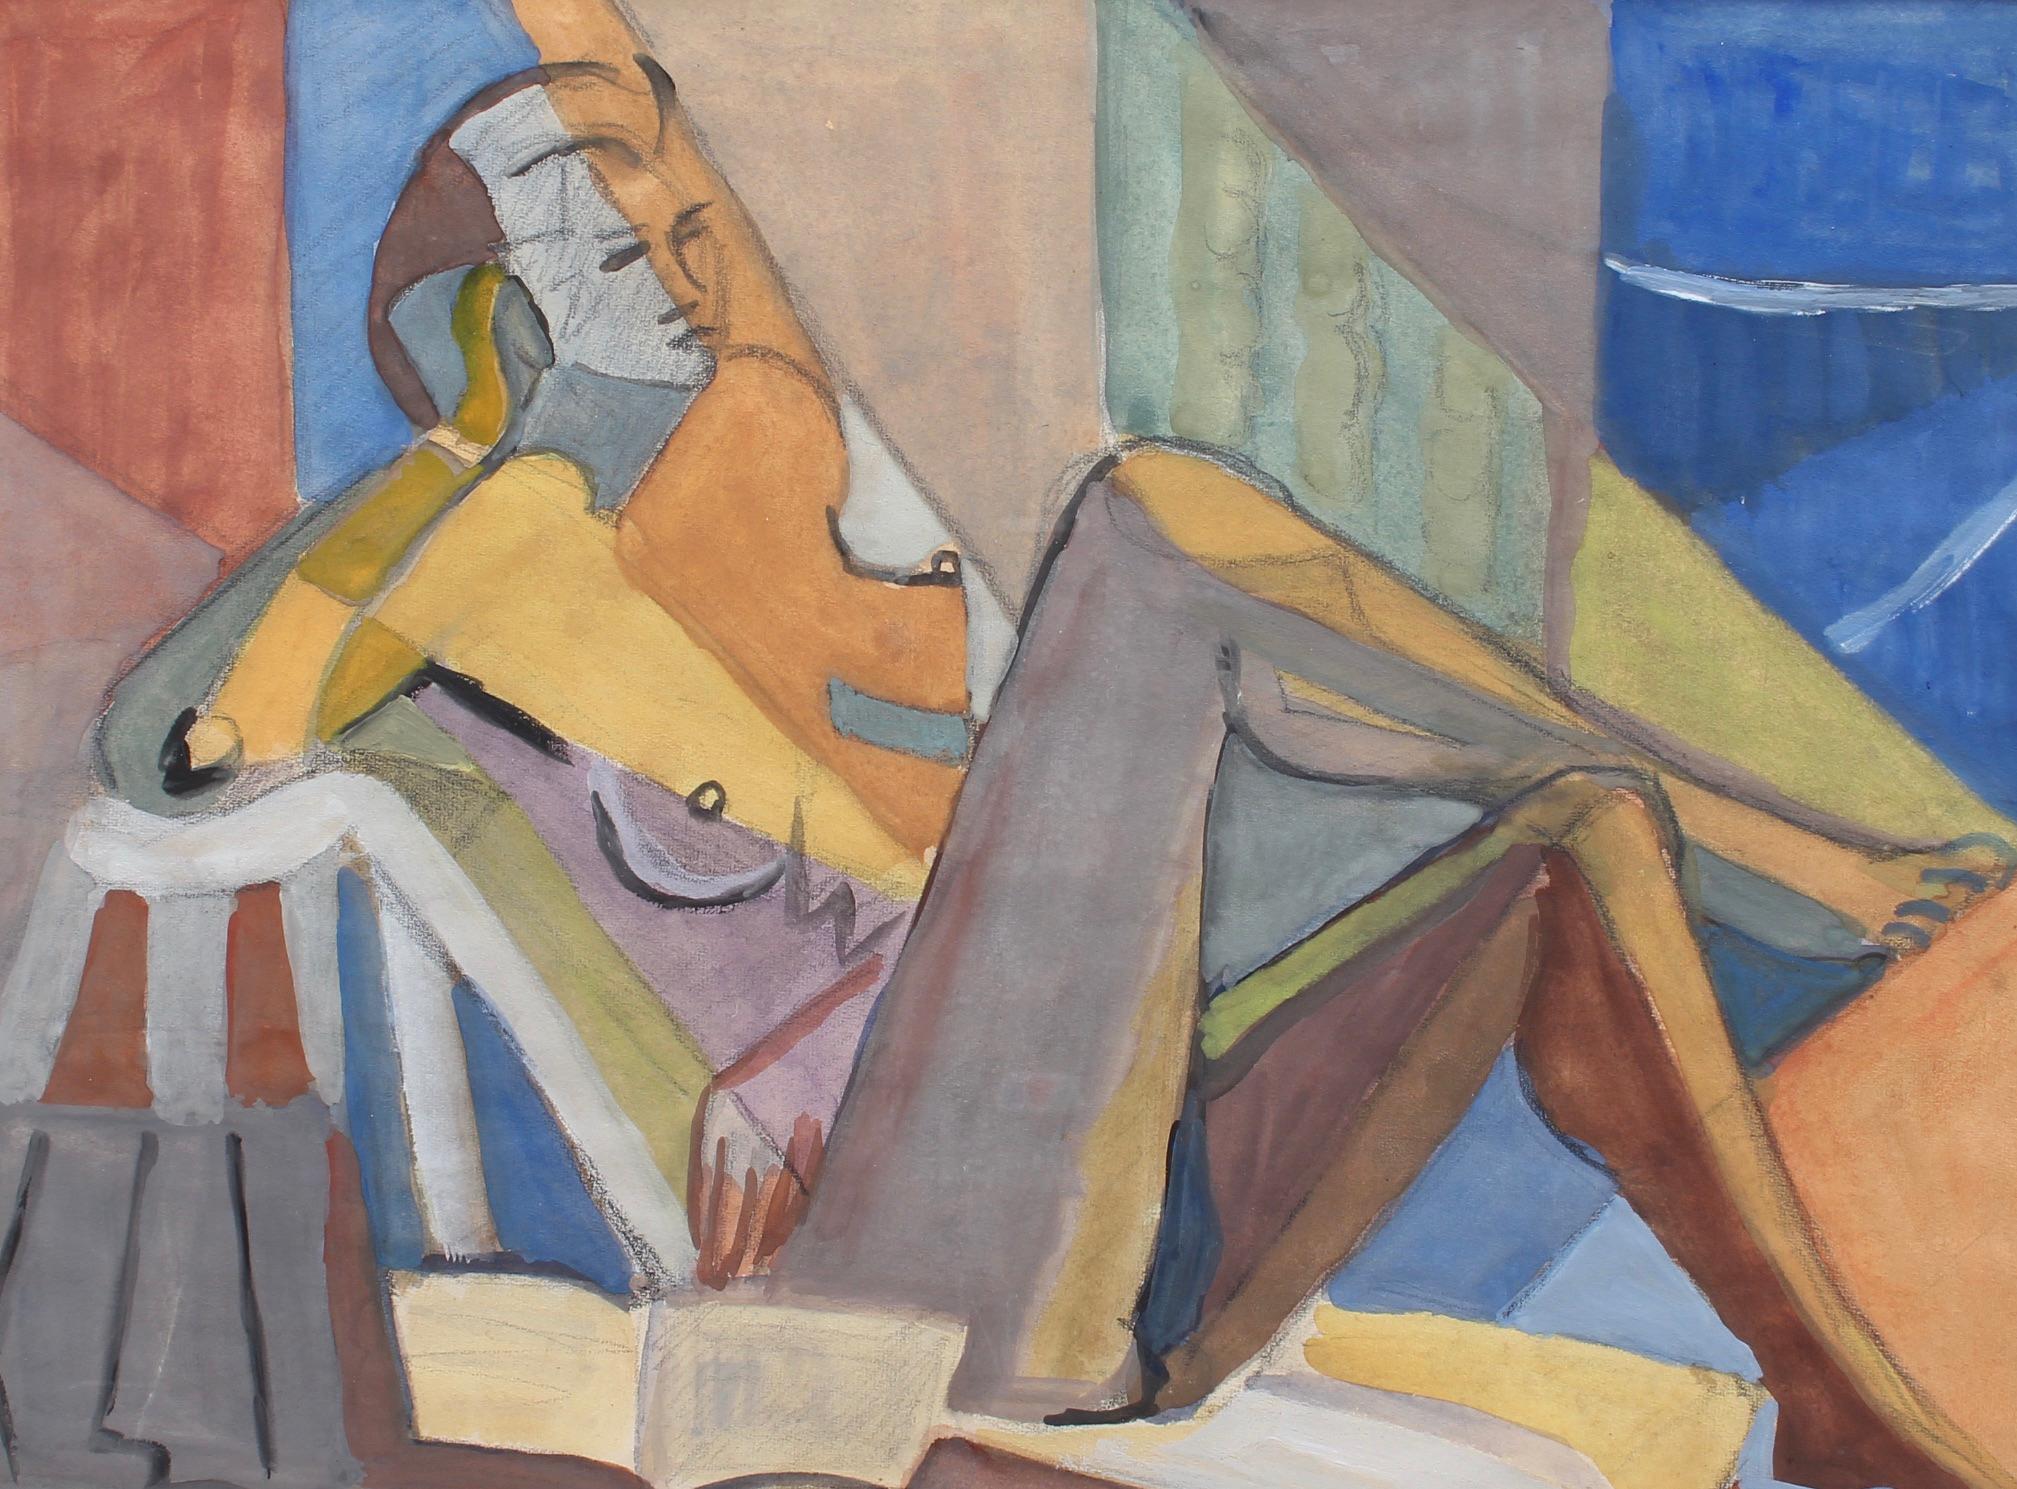 A portrait of reposing cubist nude with book, in gouache on fine art paper (circa 1950s), by artist Kosta Stojanovitch. This work is one in a series of several images this gallery has acquired. In this depiction, an elegant woman lounges